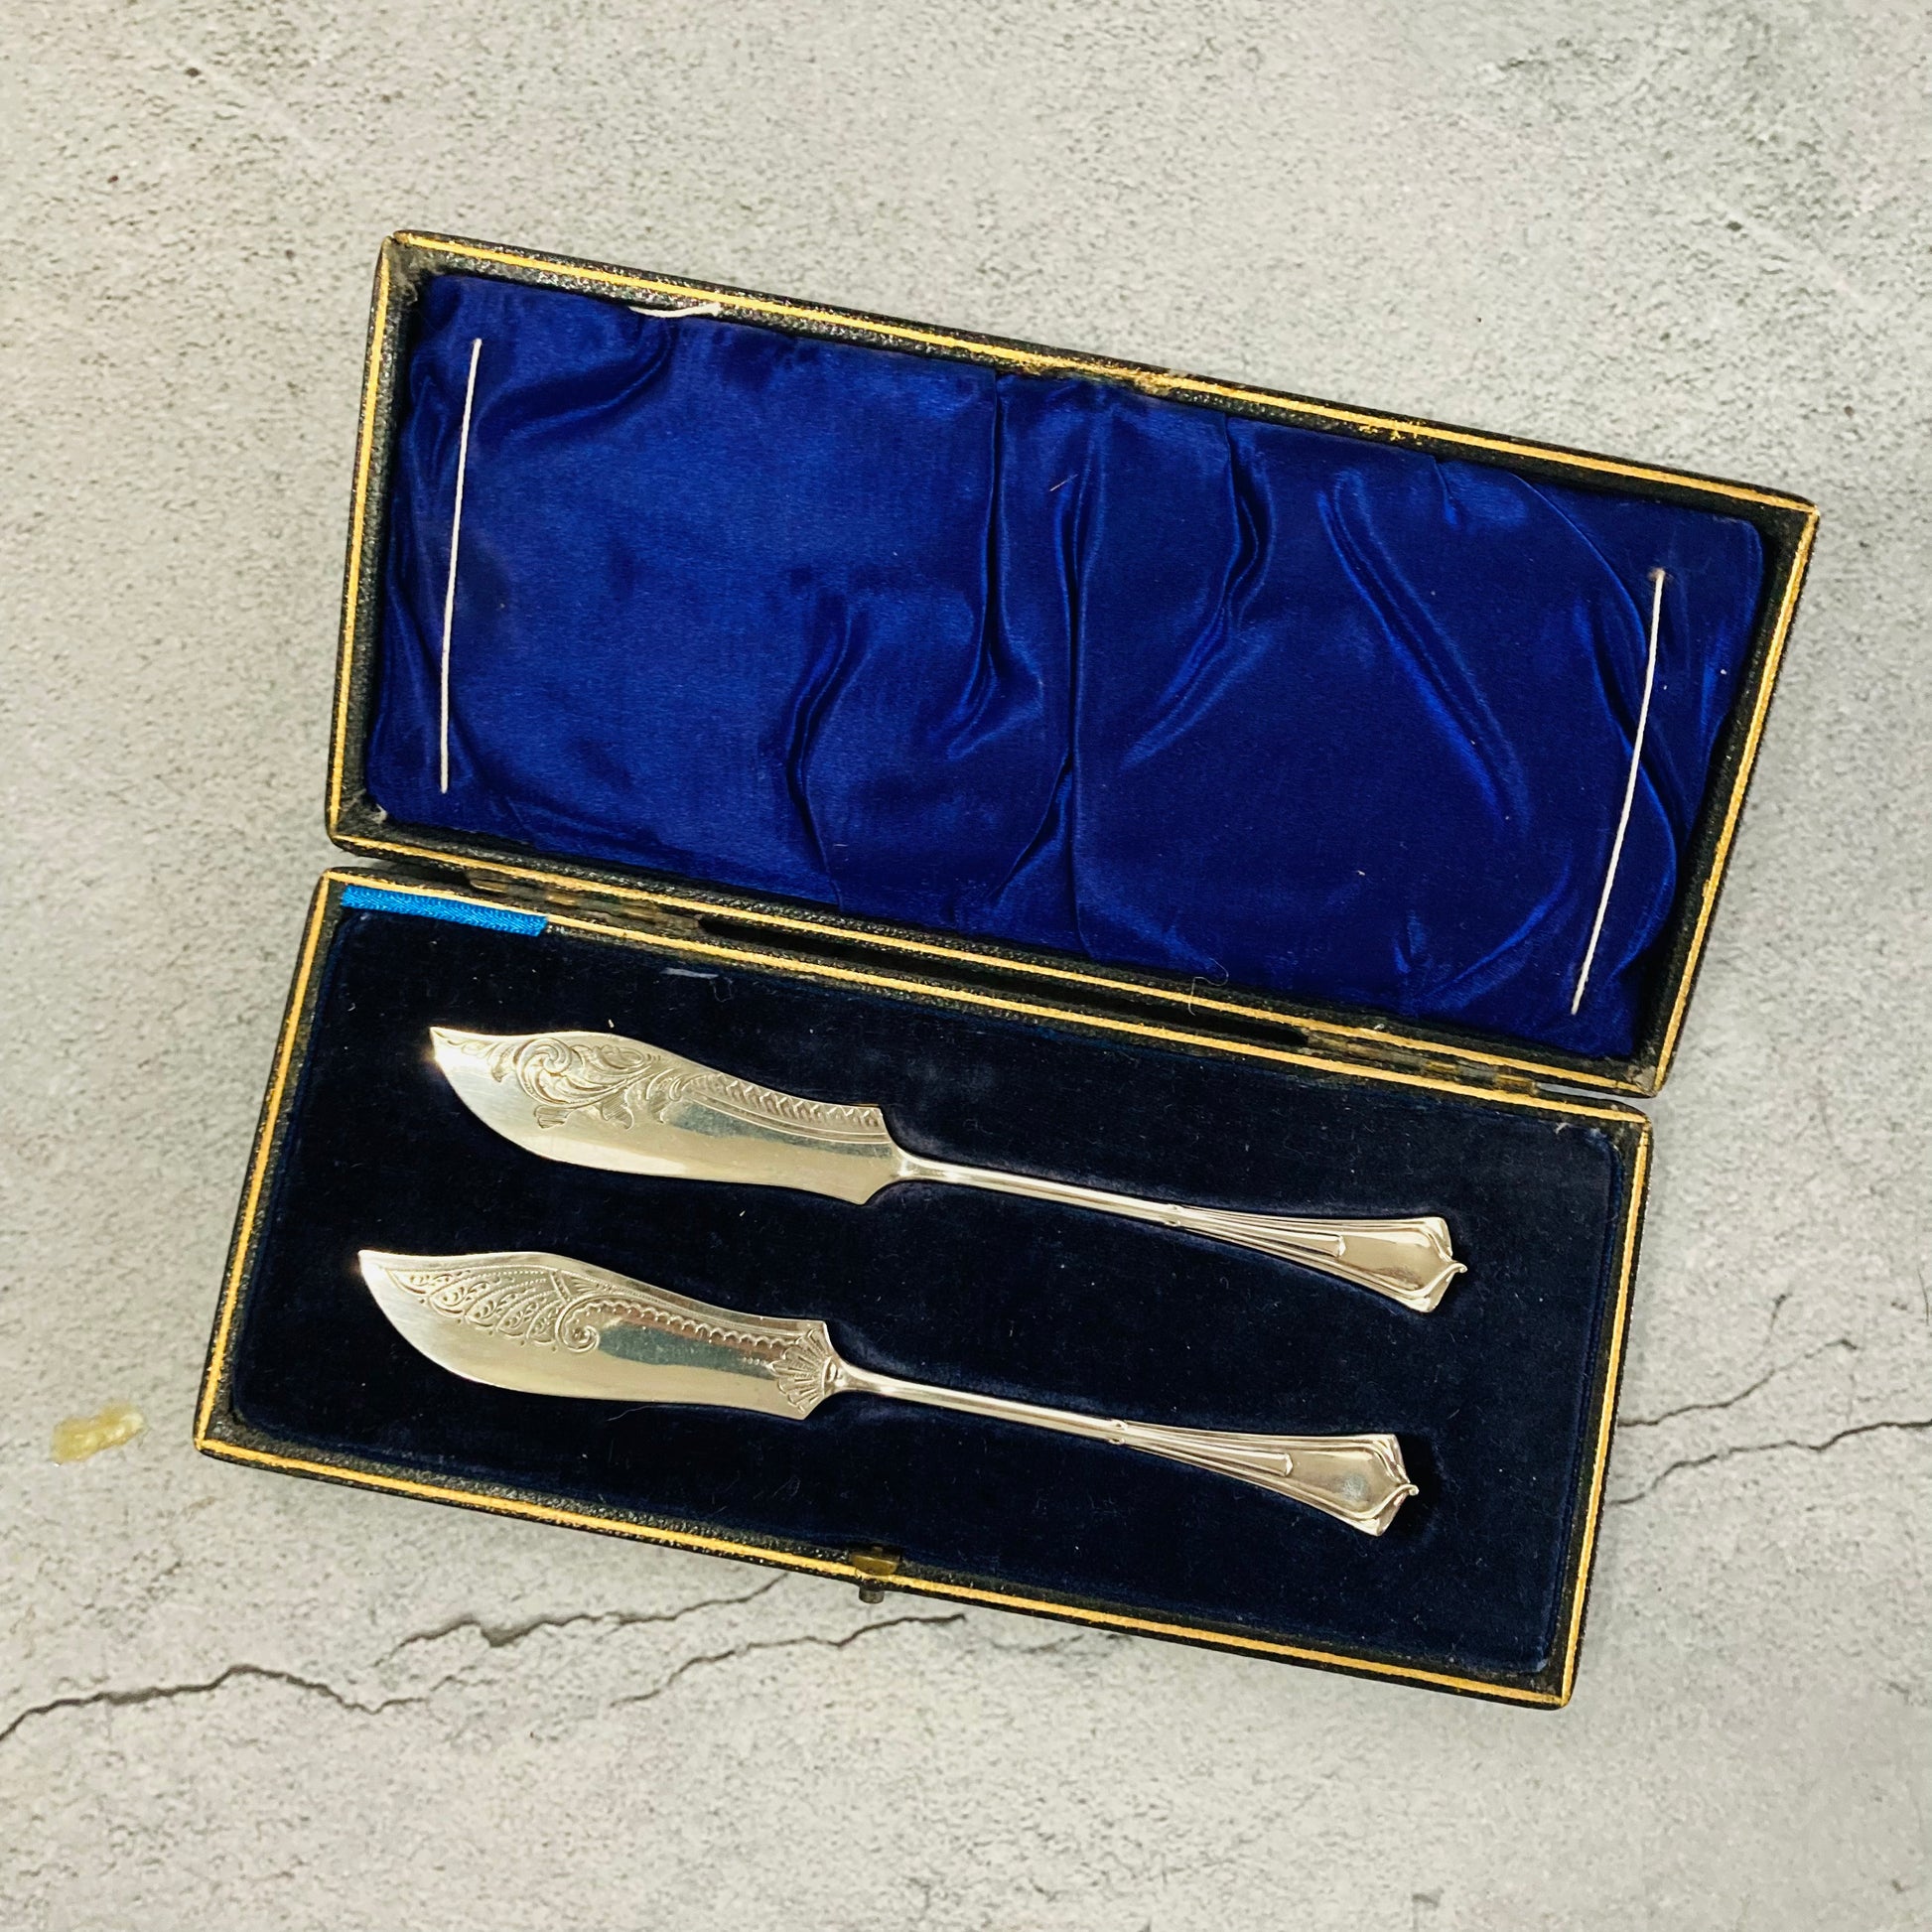 Antique Silver Engraved Miniature Butter Knives